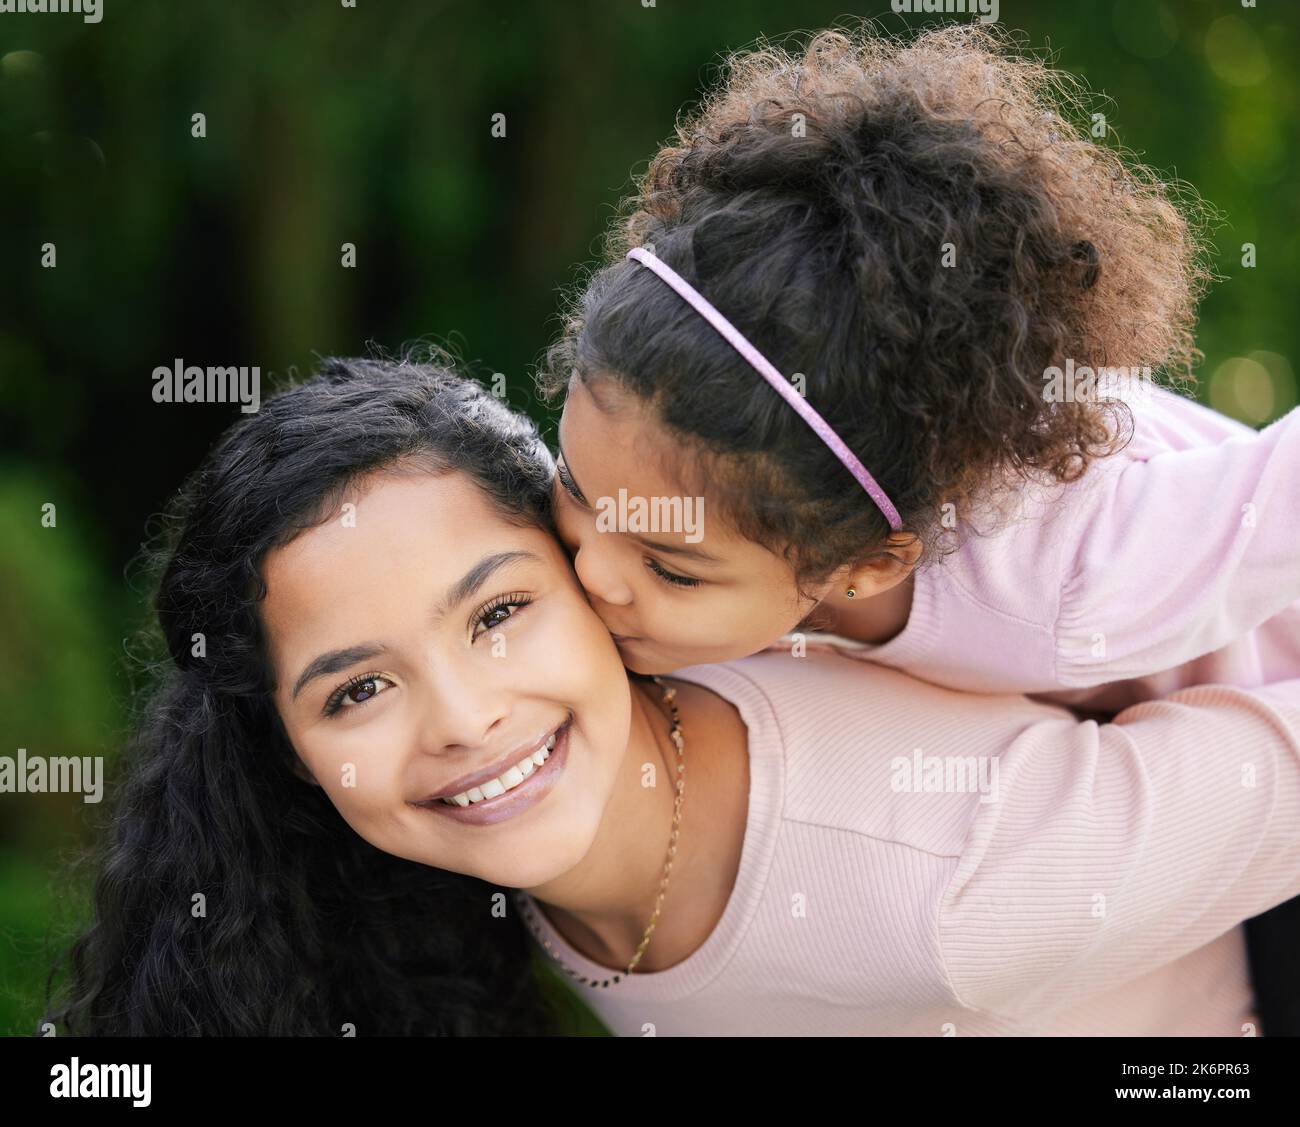 Happiness is seeing your kids happy. a little girl giving her mother a kiss on the cheek outdoors. Stock Photo